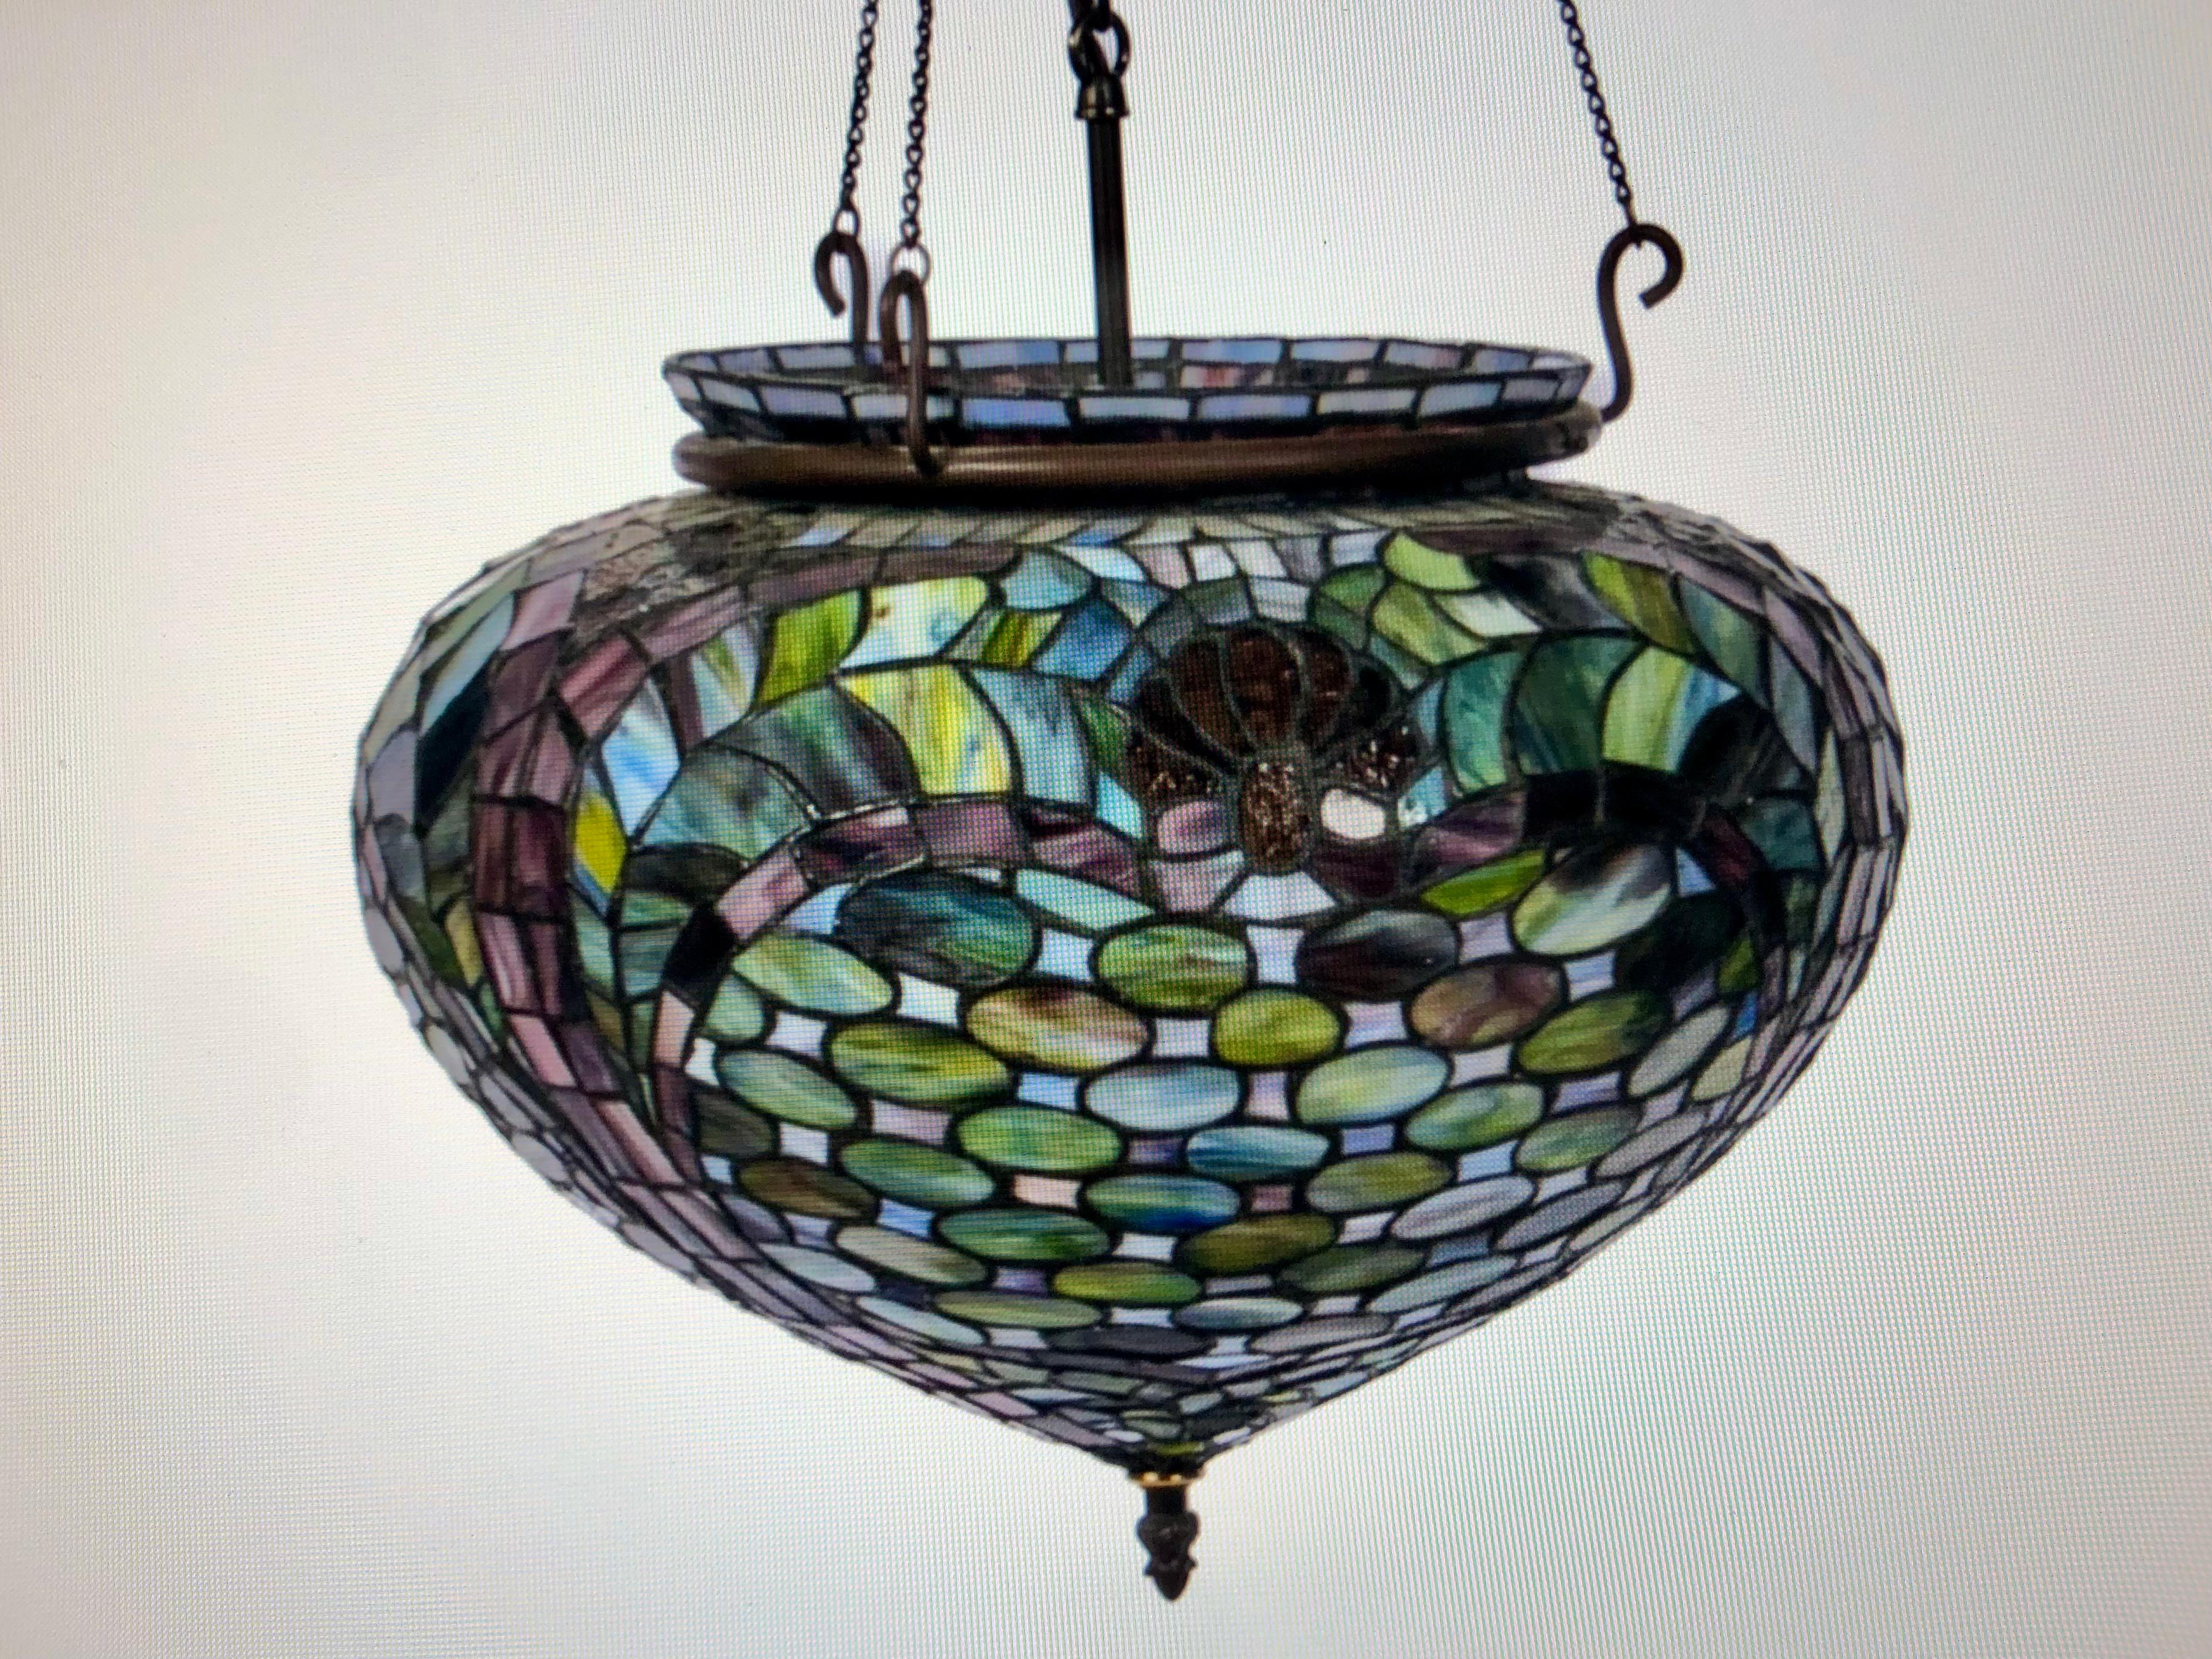 An unusual Tiffany style glass pendant in wonderful condition.
This piece features a large bulbous form and is in a palette of blues, purples and lilacs, with the bulb terminating in a lovely brass finial.
American, 20th century, possibly